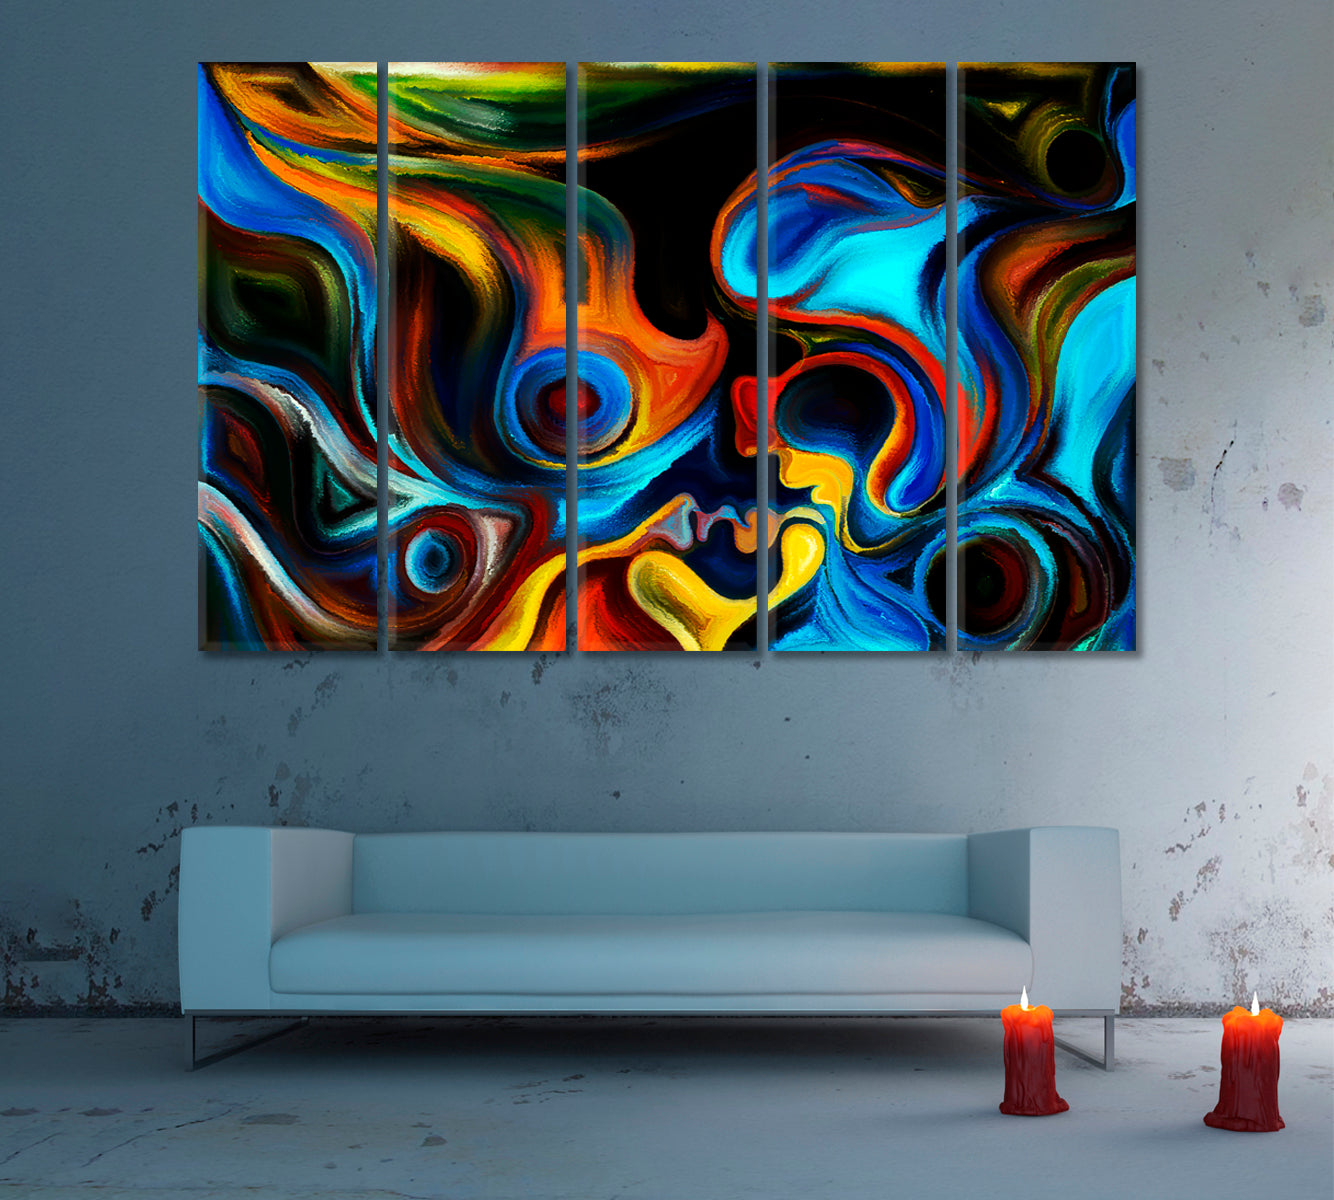 Welcome To Where Love Takes Flight Abstract Art Print Artesty 5 panels 36" x 24" 